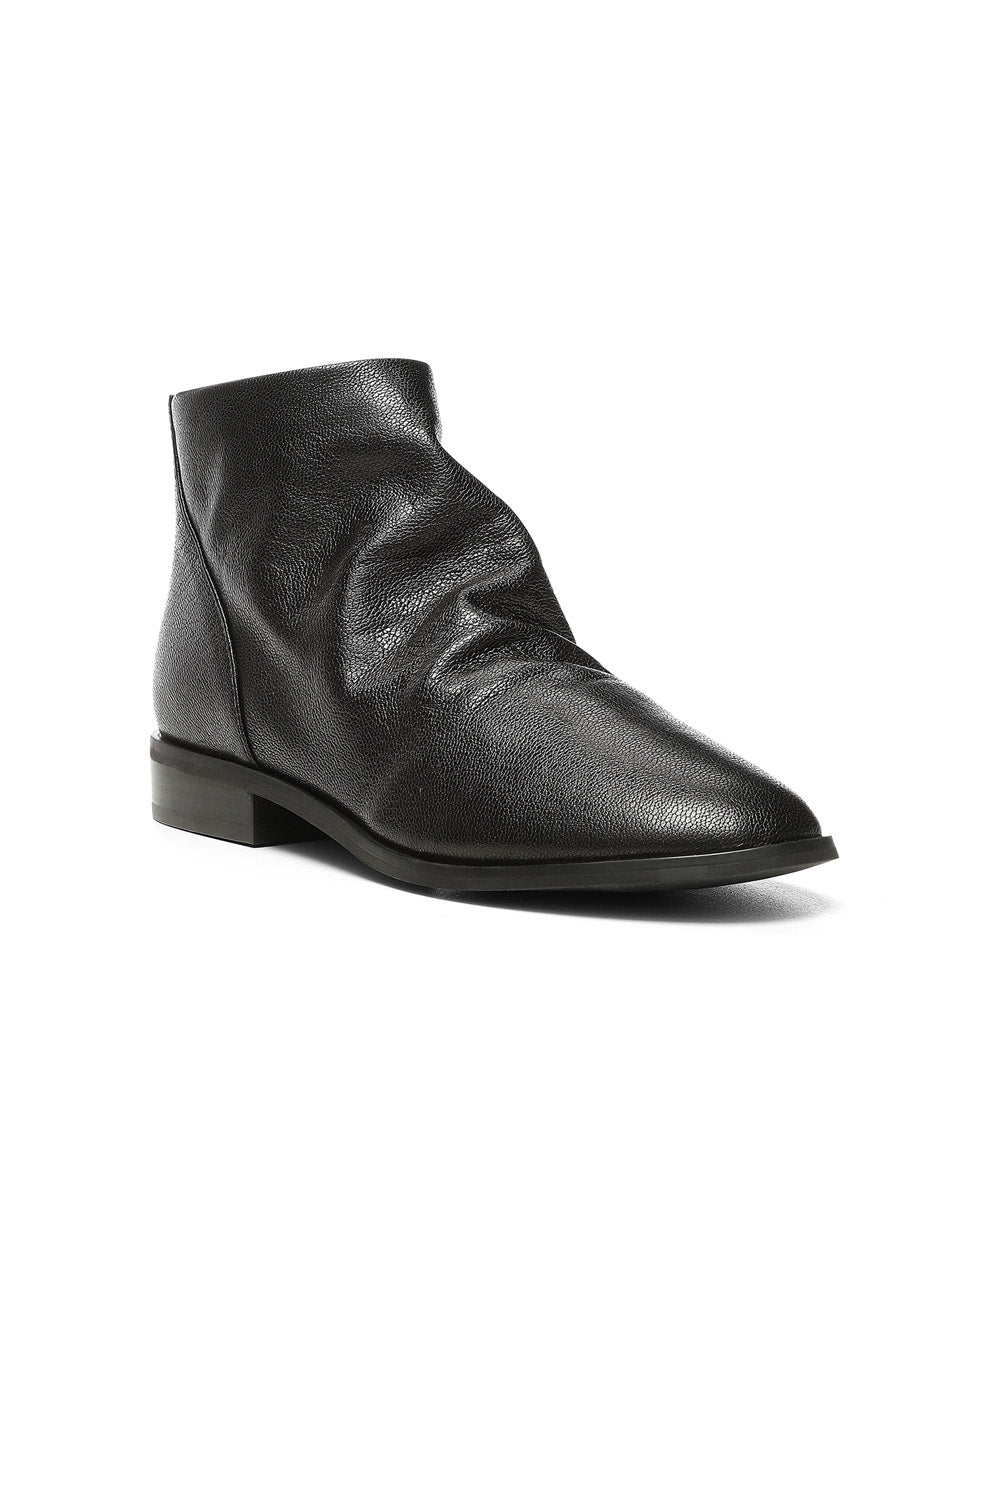 NYDJ Cailian Booties In Leather - Black